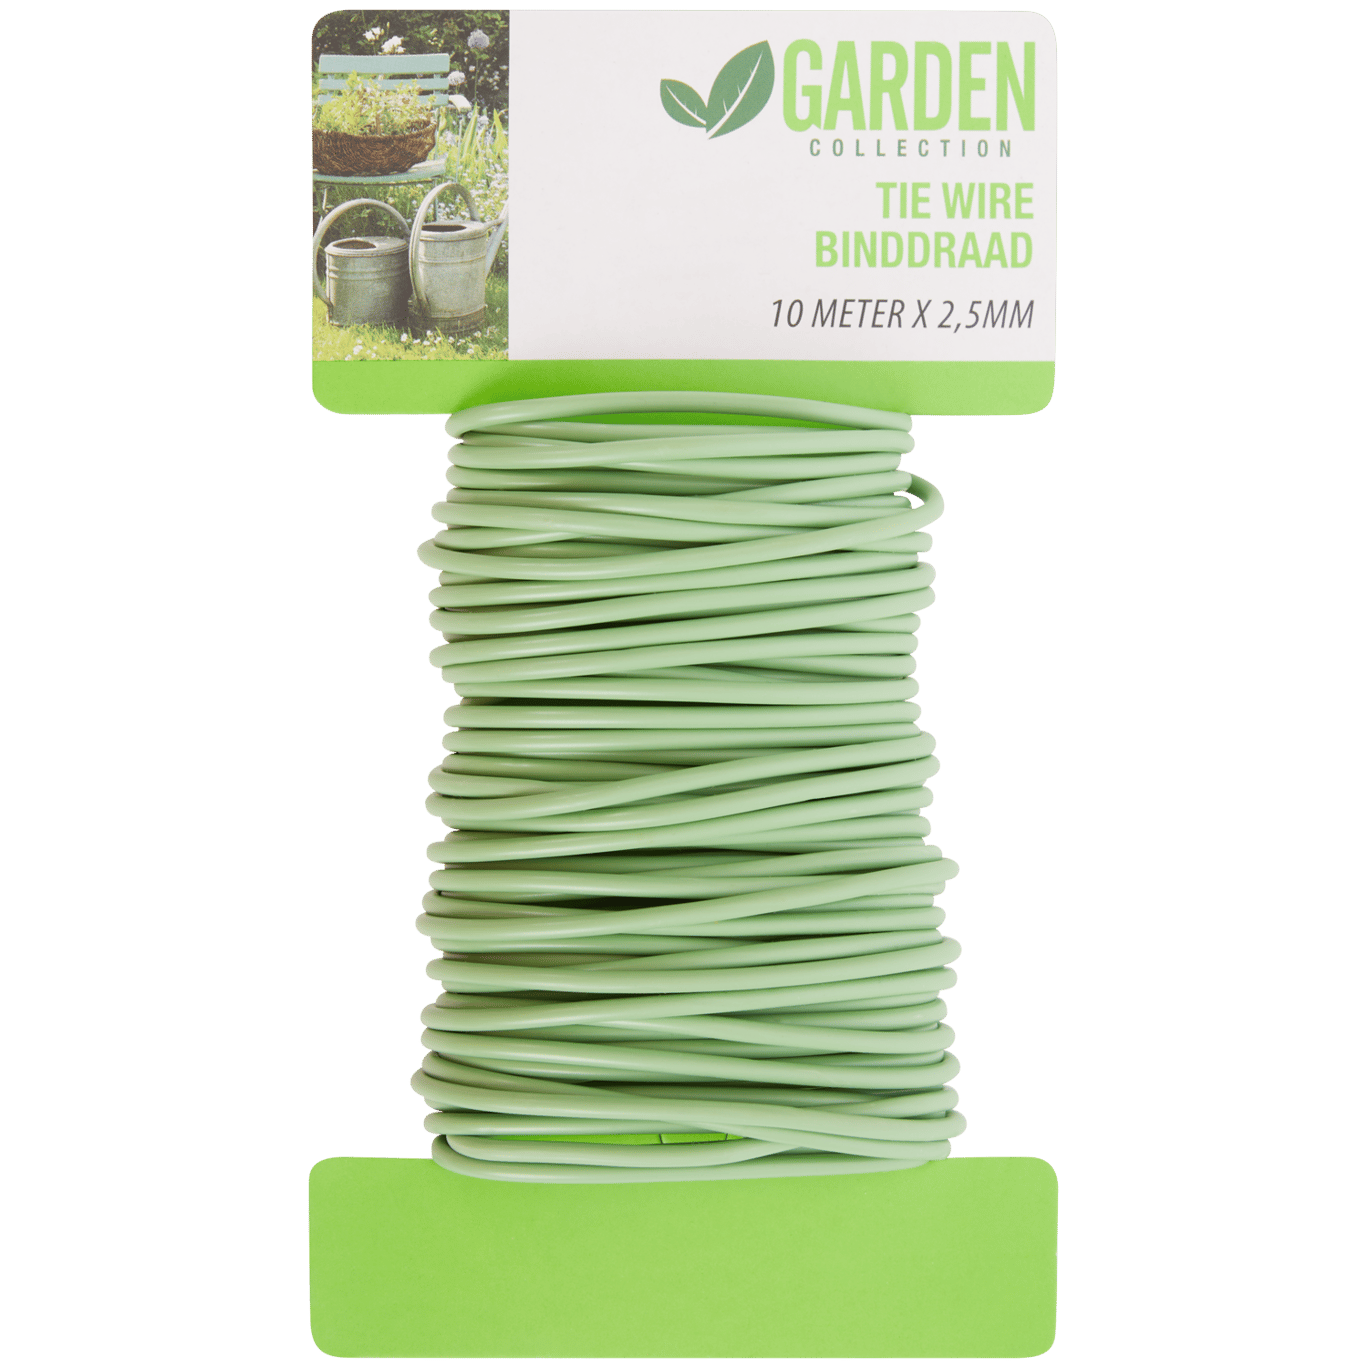 Drut ogrodowy Garden Collection